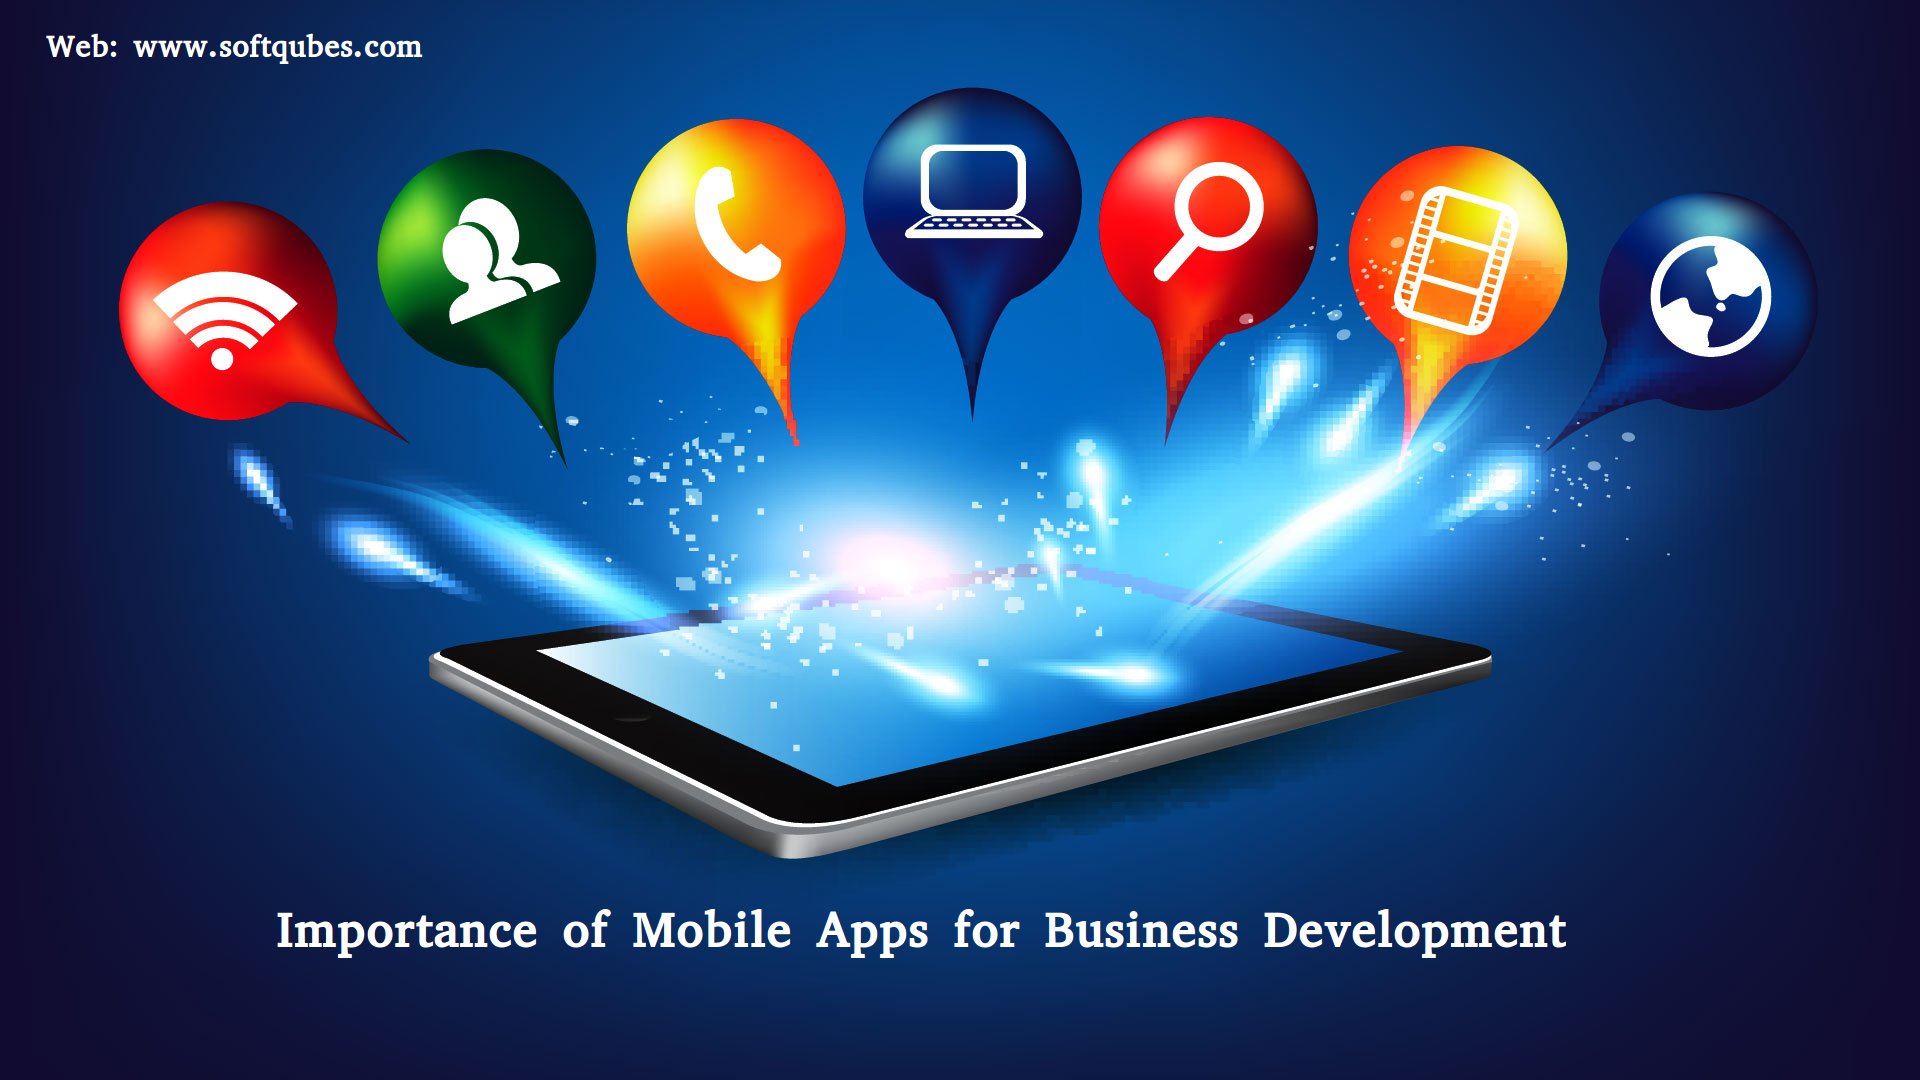 Importance of Mobile Apps for Your Business